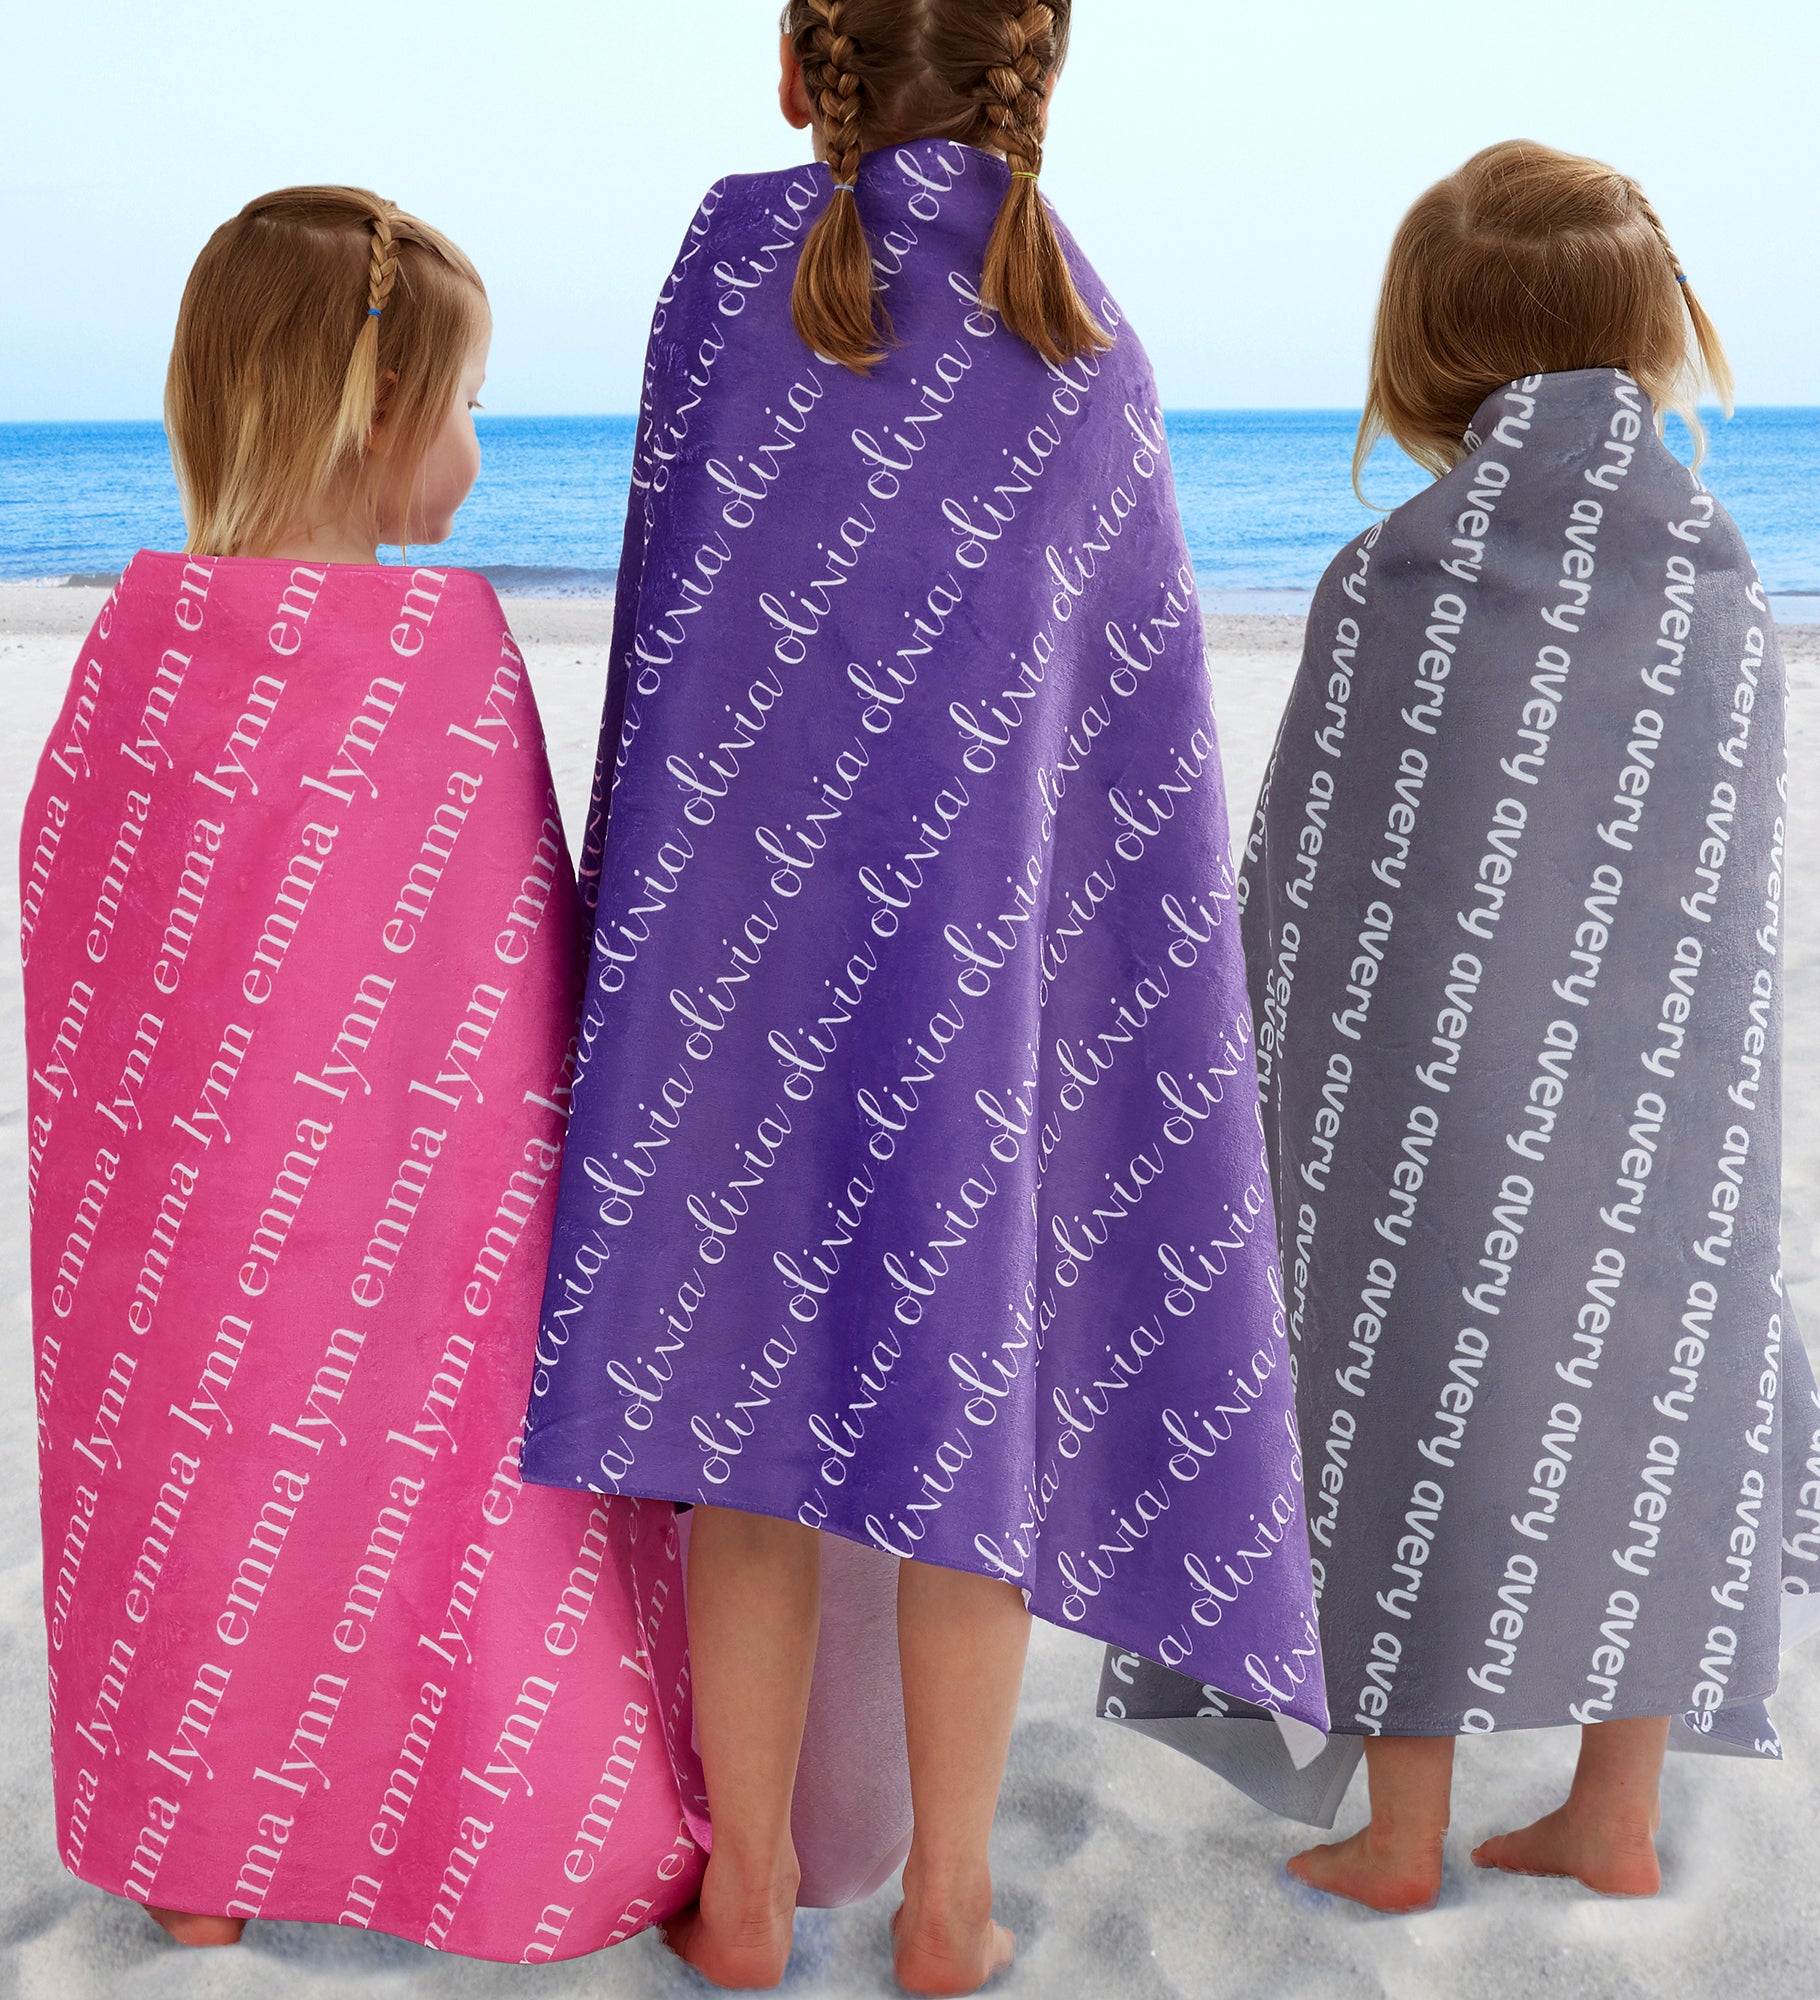 Playful Name Personalized Beach Towel